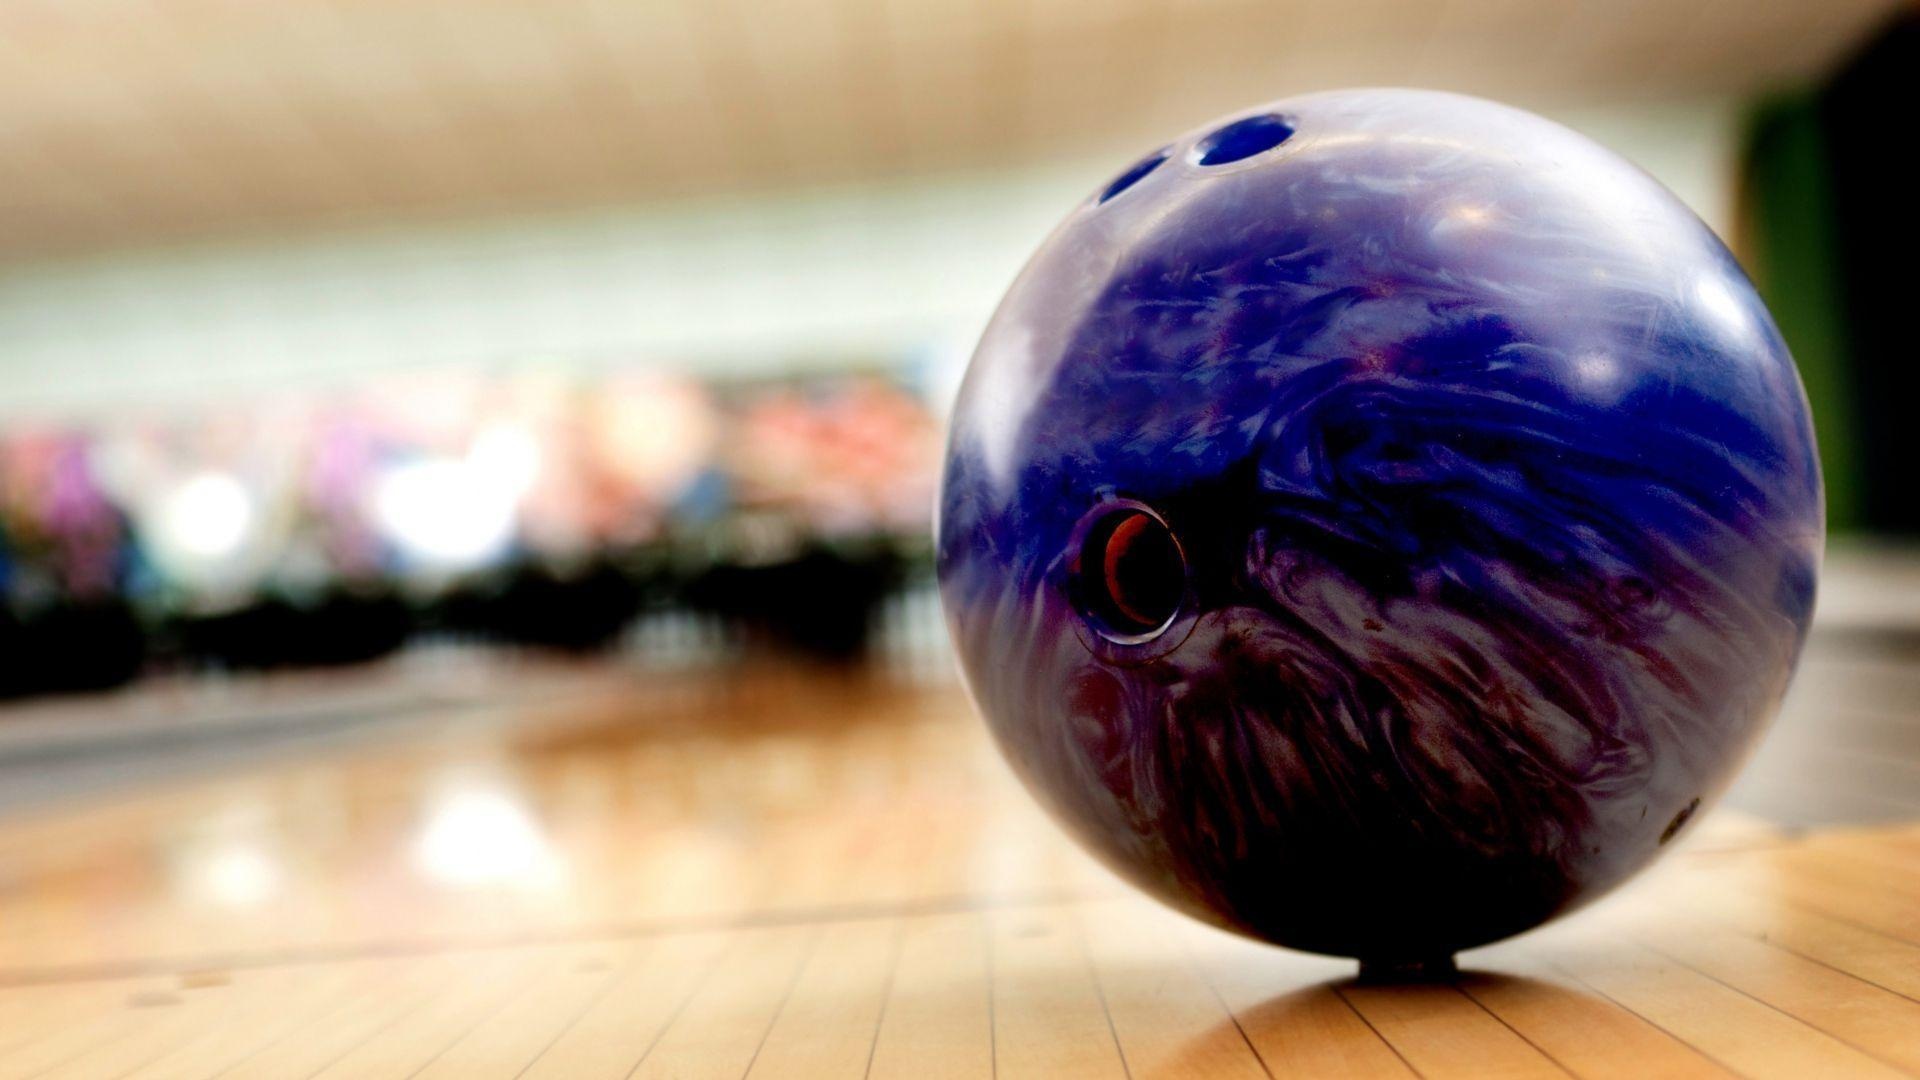 Bowling: An activity which goal is to knock down the pins set at the end of the board-less track. 1920x1080 Full HD Wallpaper.